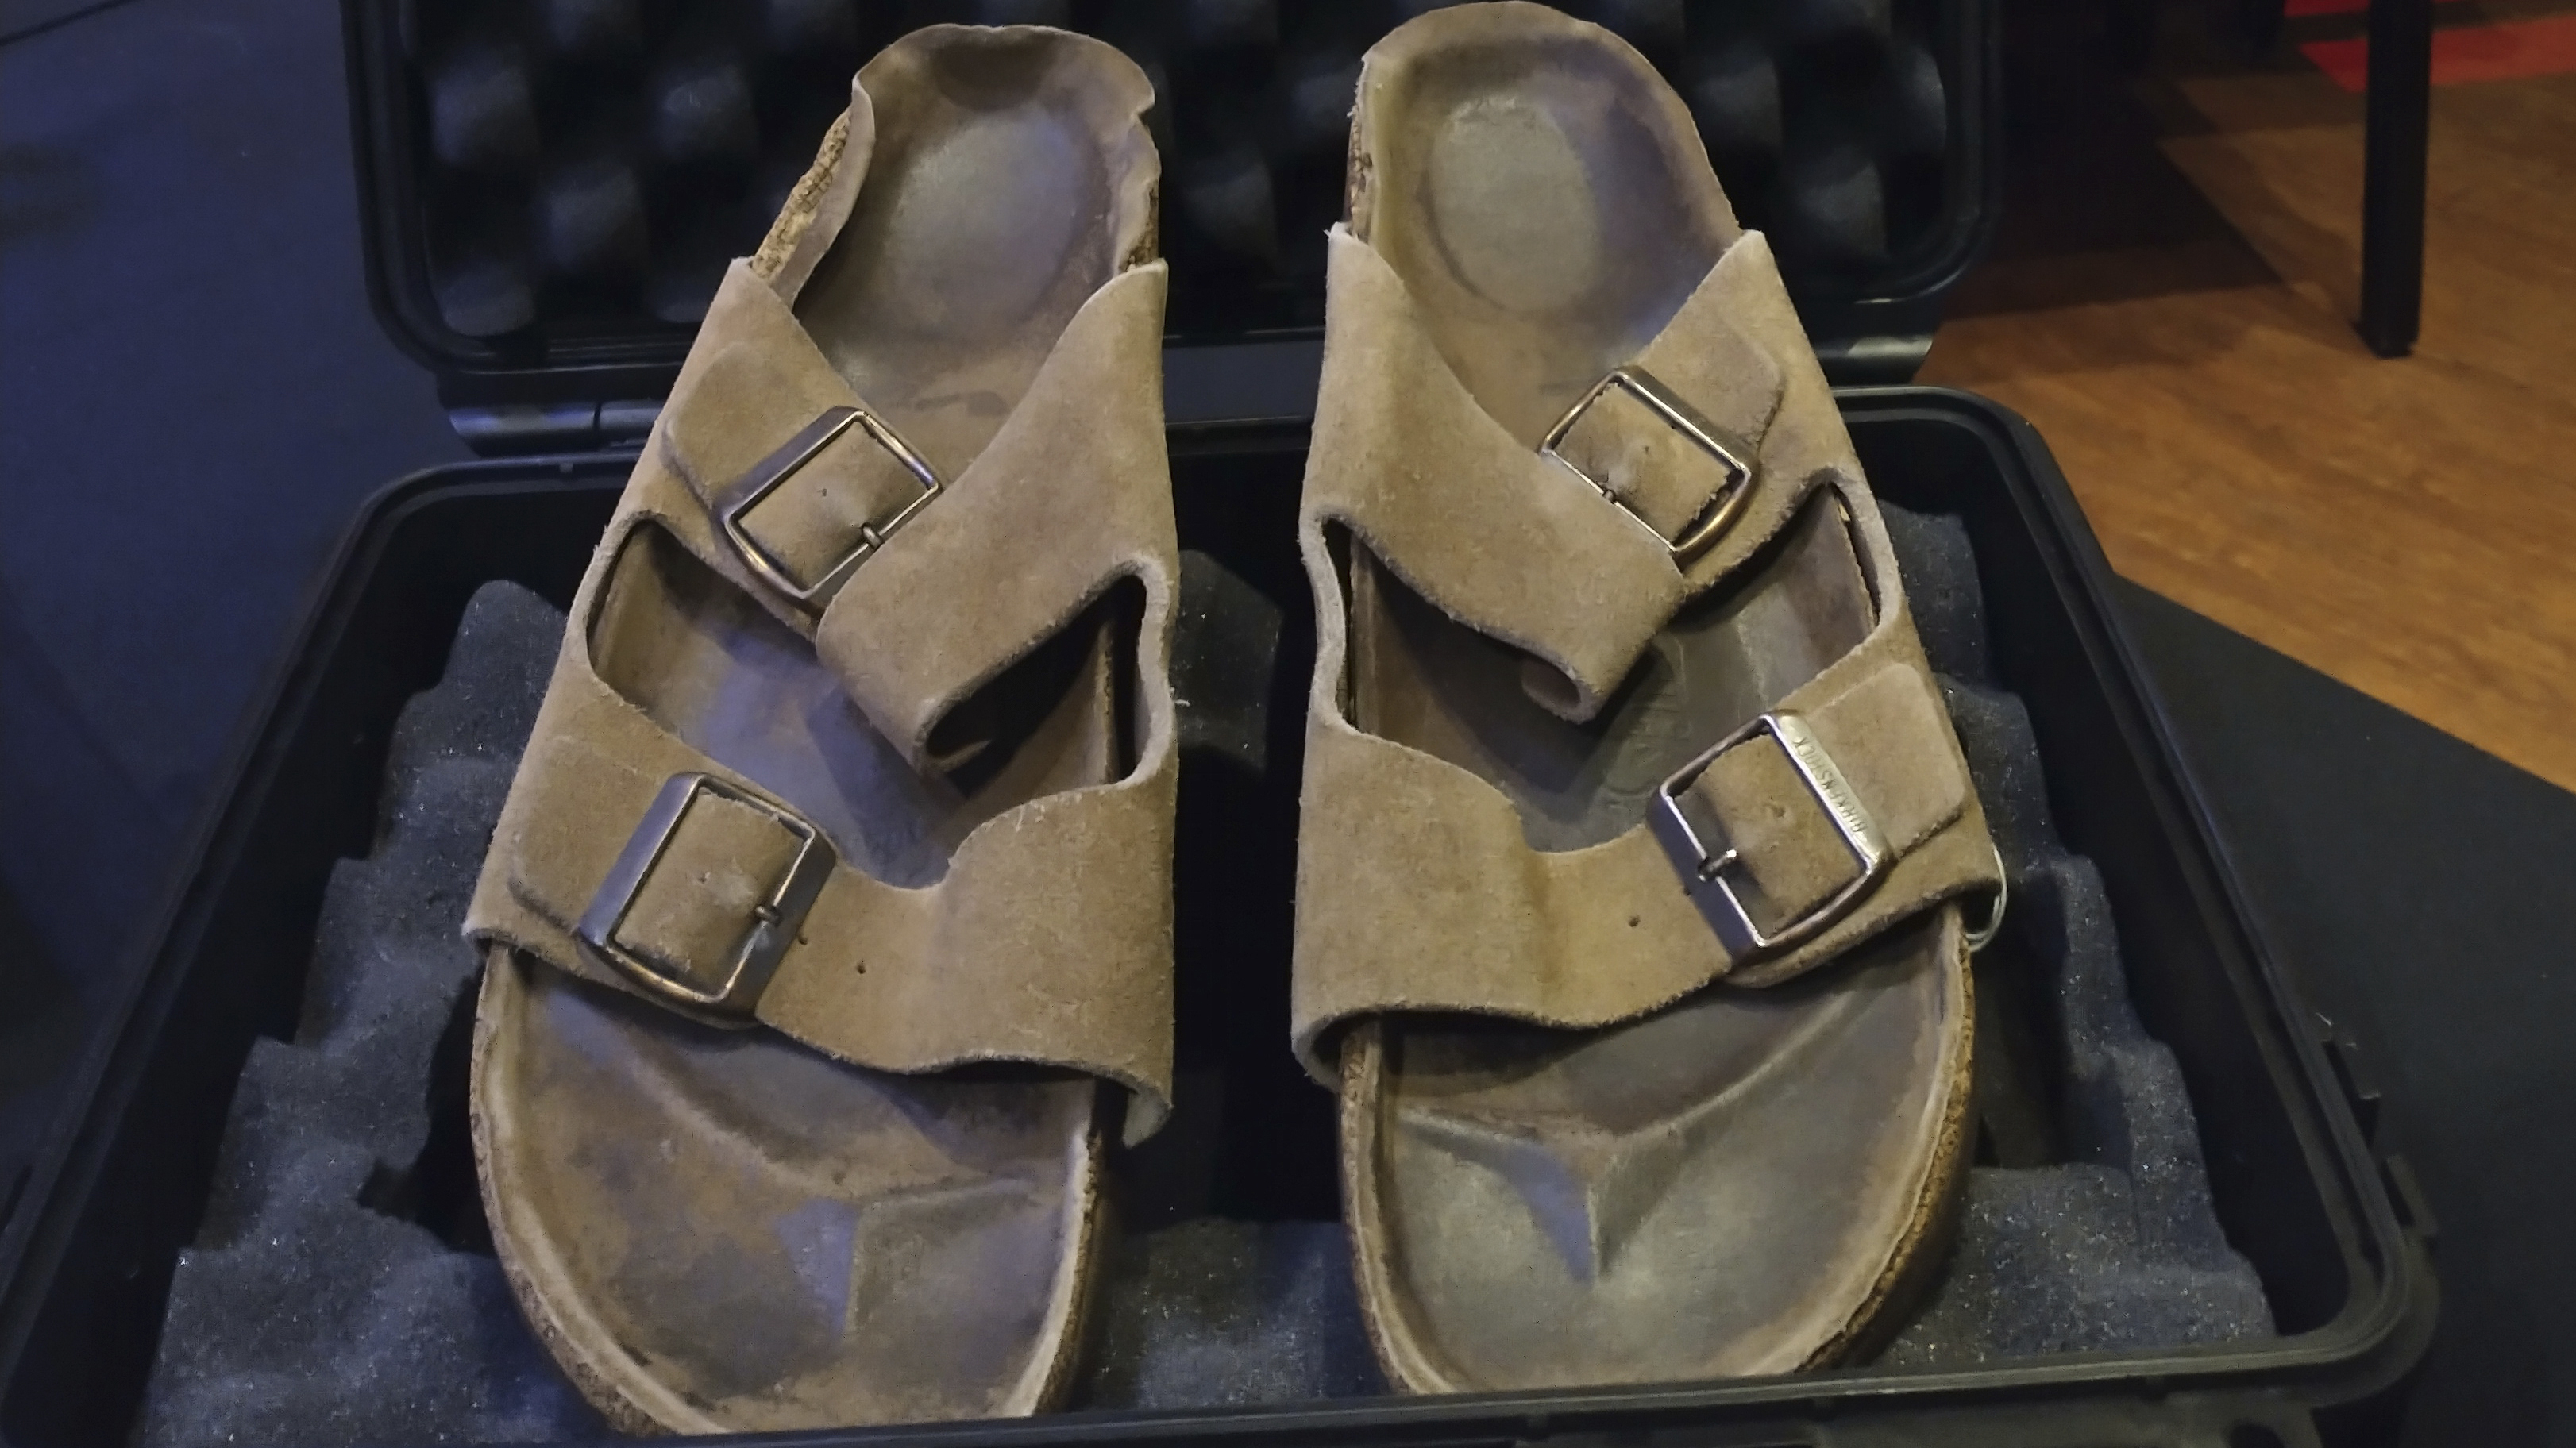 1970s Sandals Worn by Steve Jobs Auctioned for $218,000